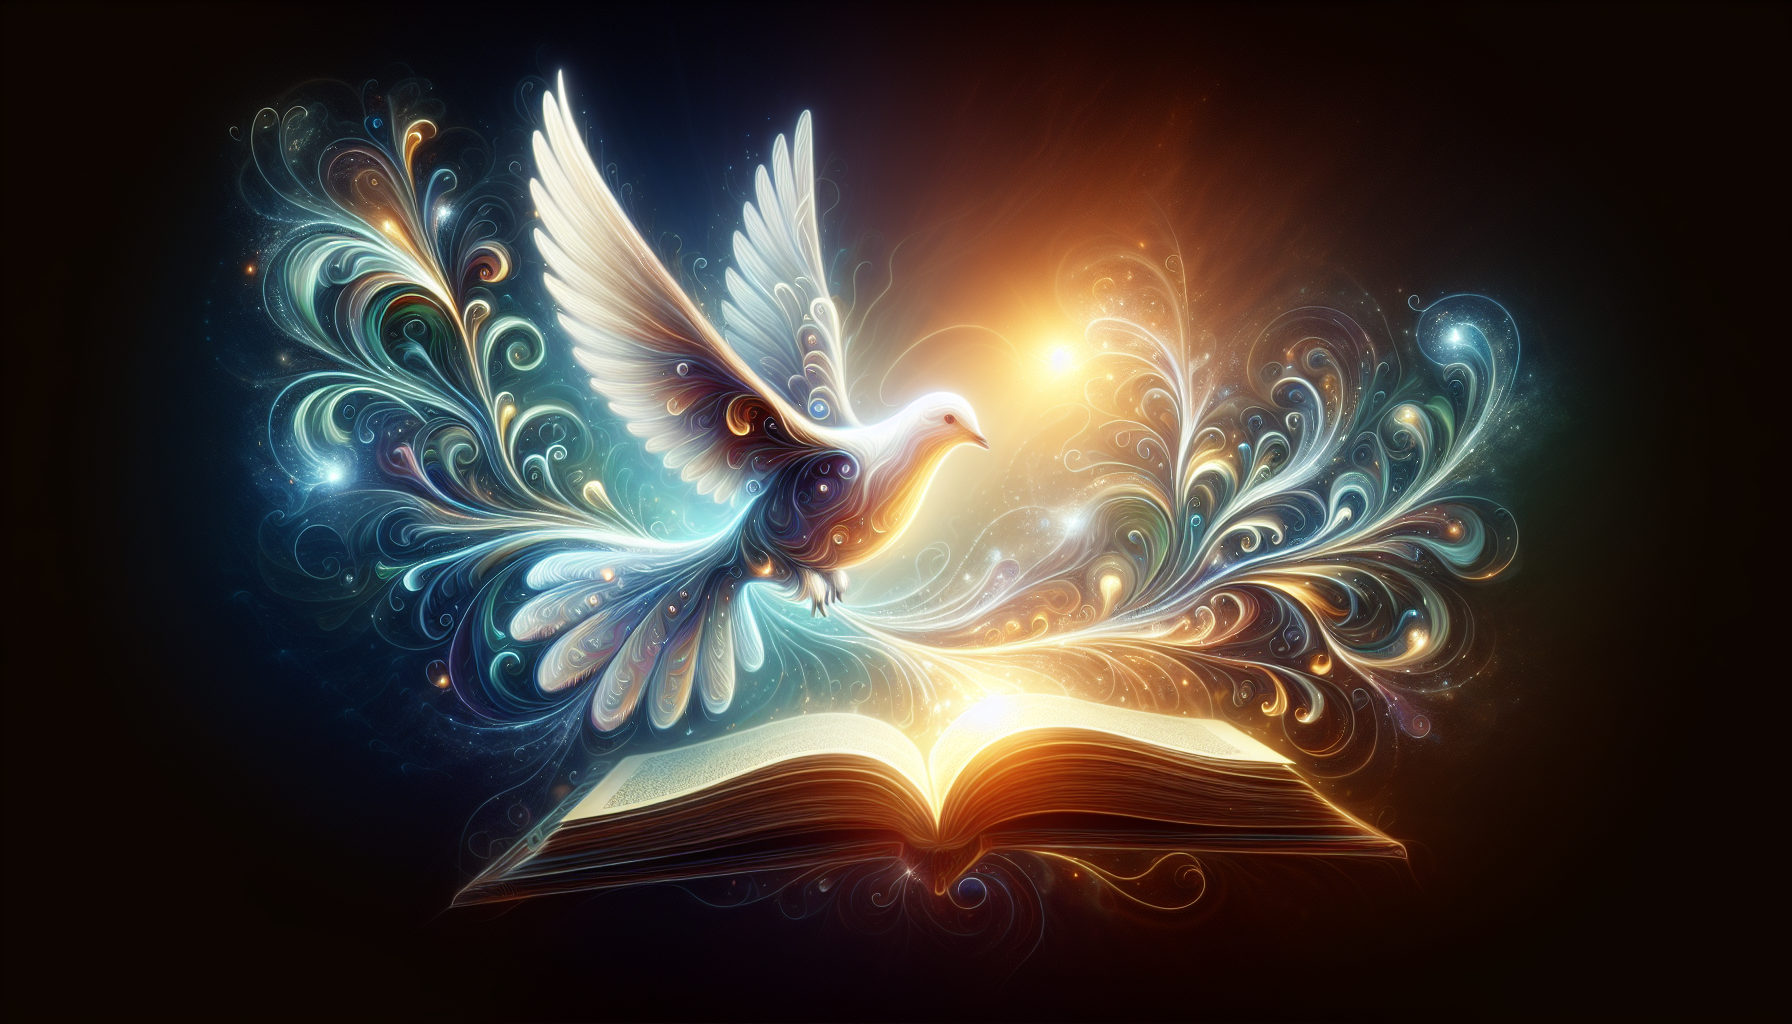 Create a detailed, serene illustration of the Holy Spirit as a dove, radiating light and peace, soaring above an open Bible with soft, heavenly light illuminating the scene. Include subtle artistic ac